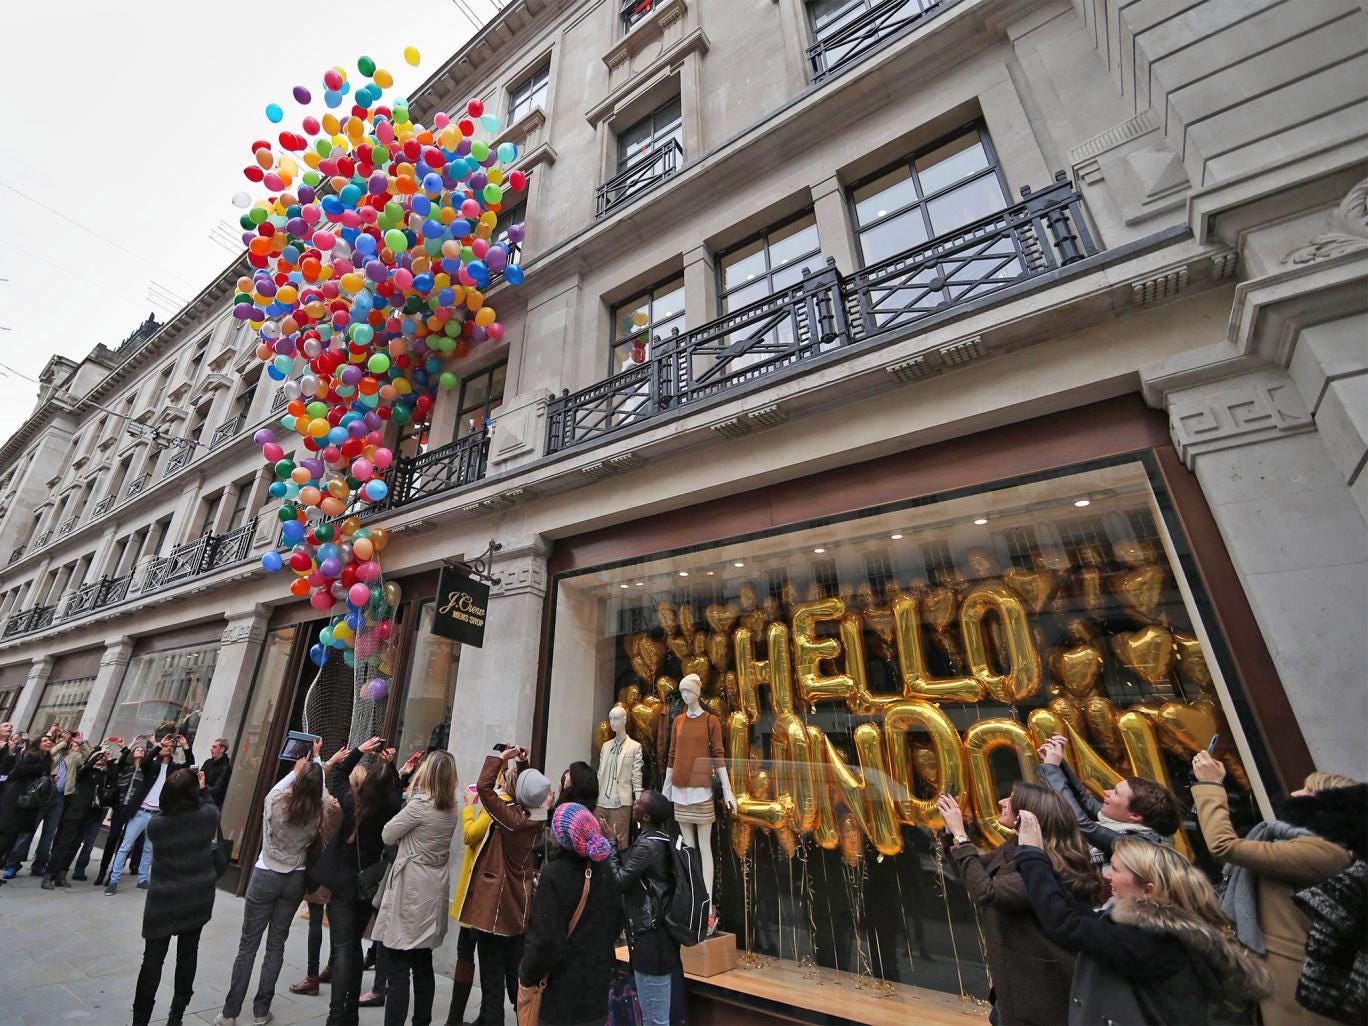 The estate has pumped money into transforming Regent Street into a luxury retail attraction, with brands such as J.Crew 